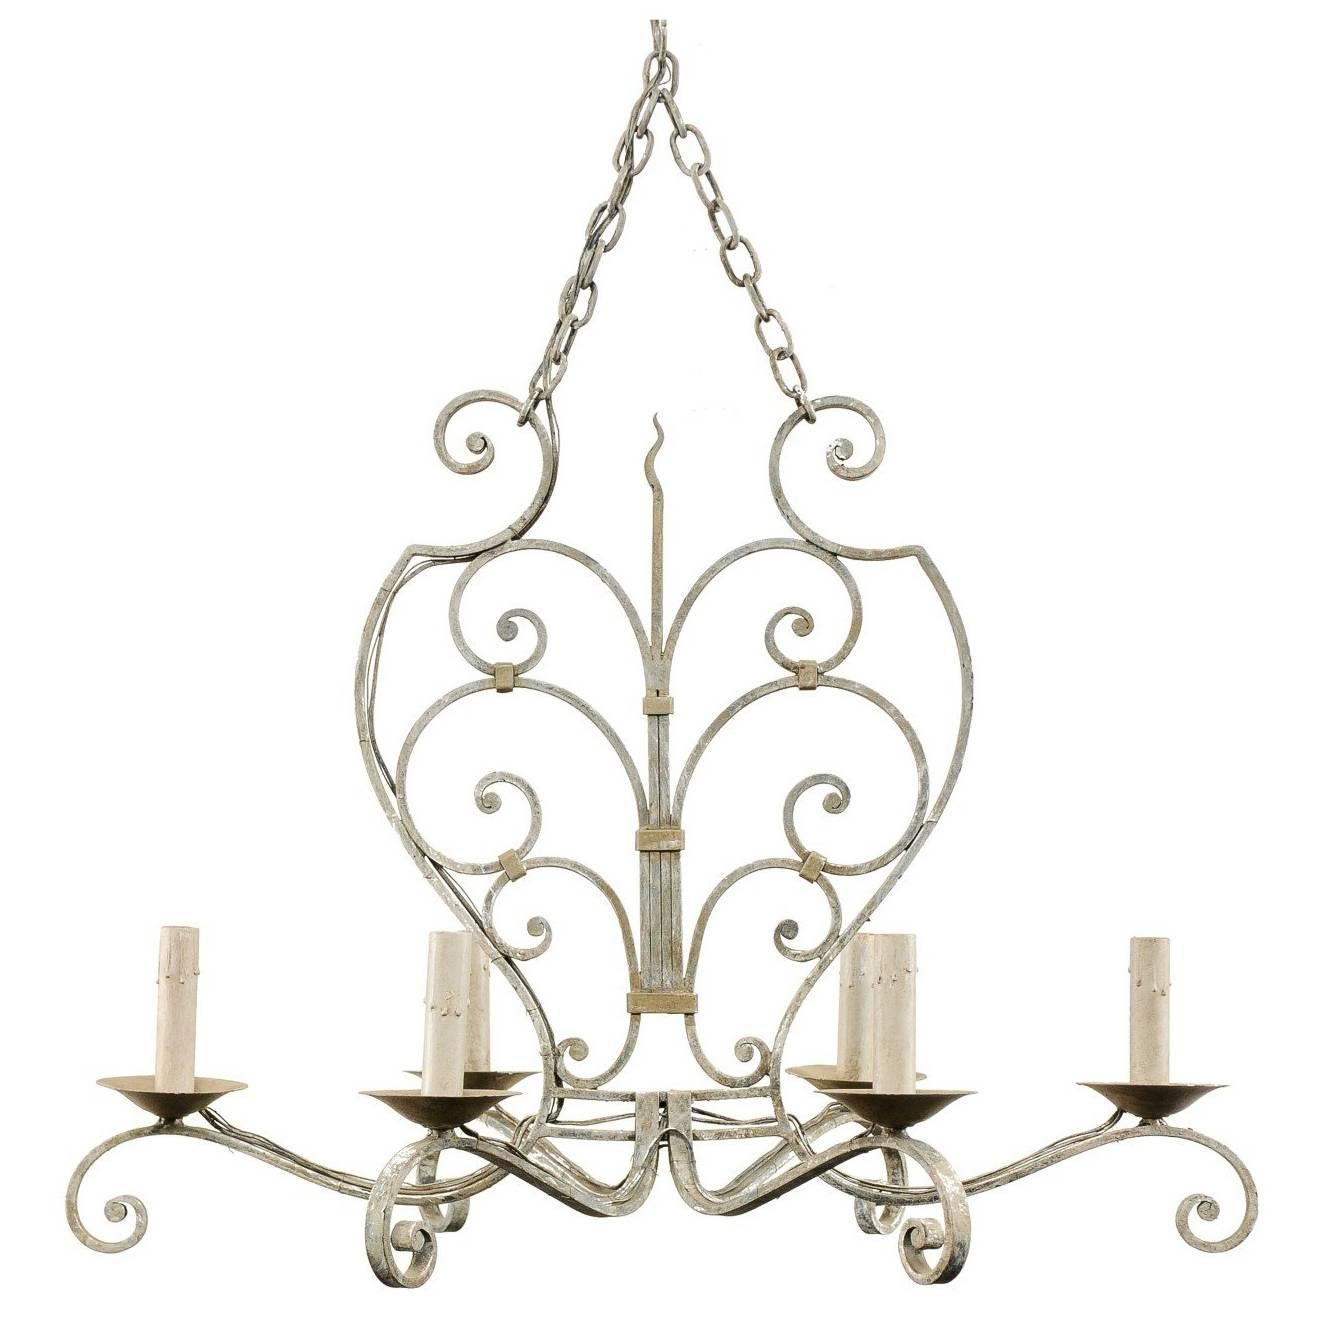 French Midcentury Painted Iron Six-Light Chandelier with Lovely Scrolls